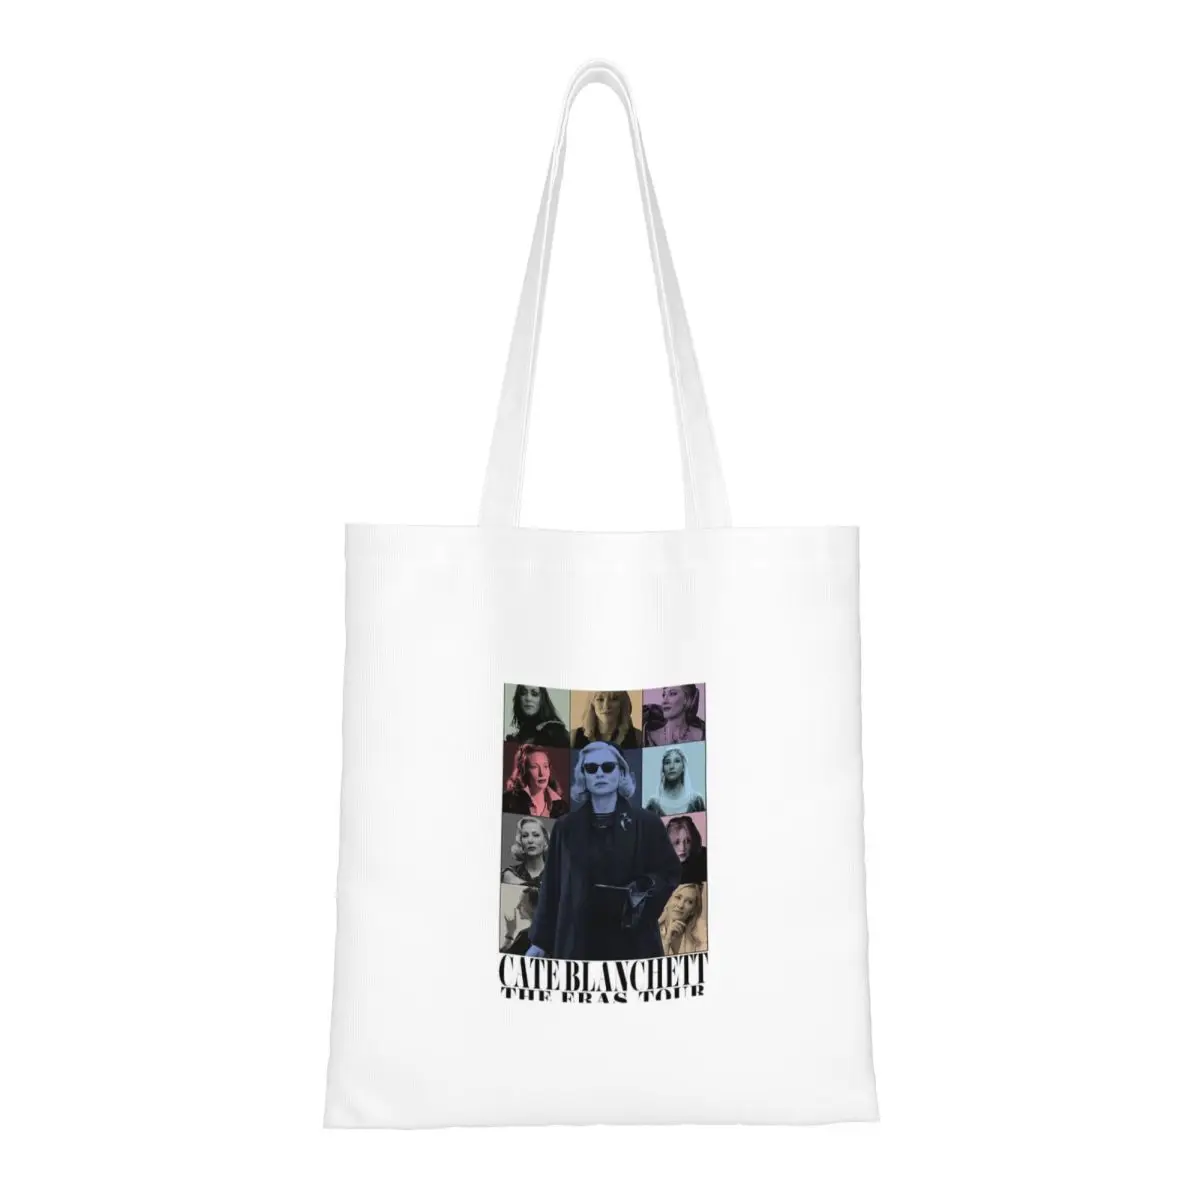 Cate Blanchett Characters Shopping Bags Canvas The Tote Bag